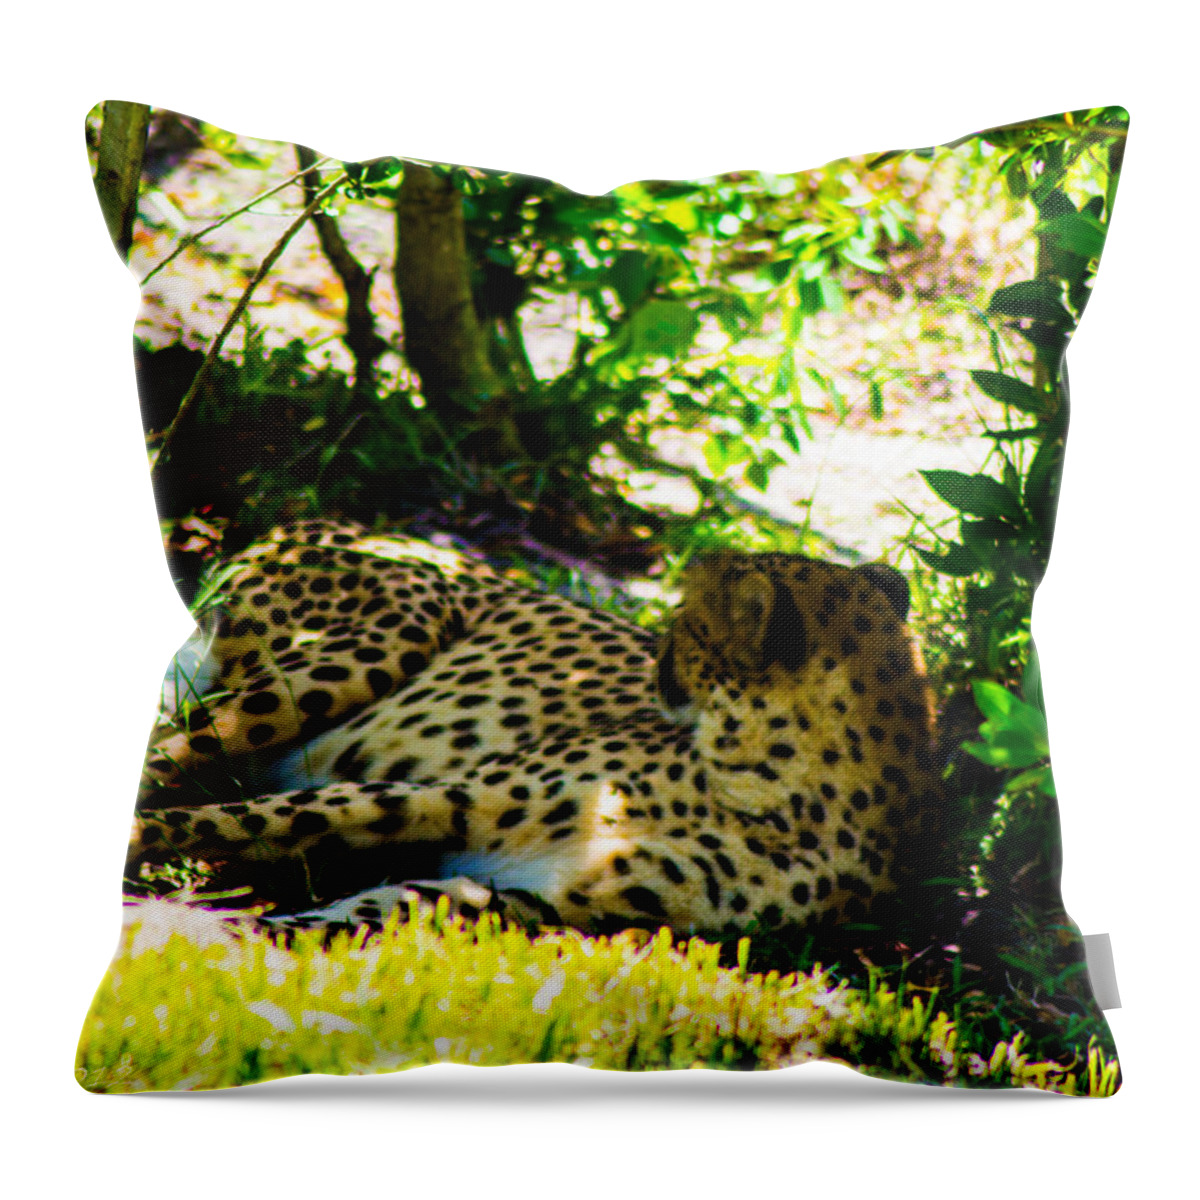  Throw Pillow featuring the photograph Chillin by Shannon Harrington